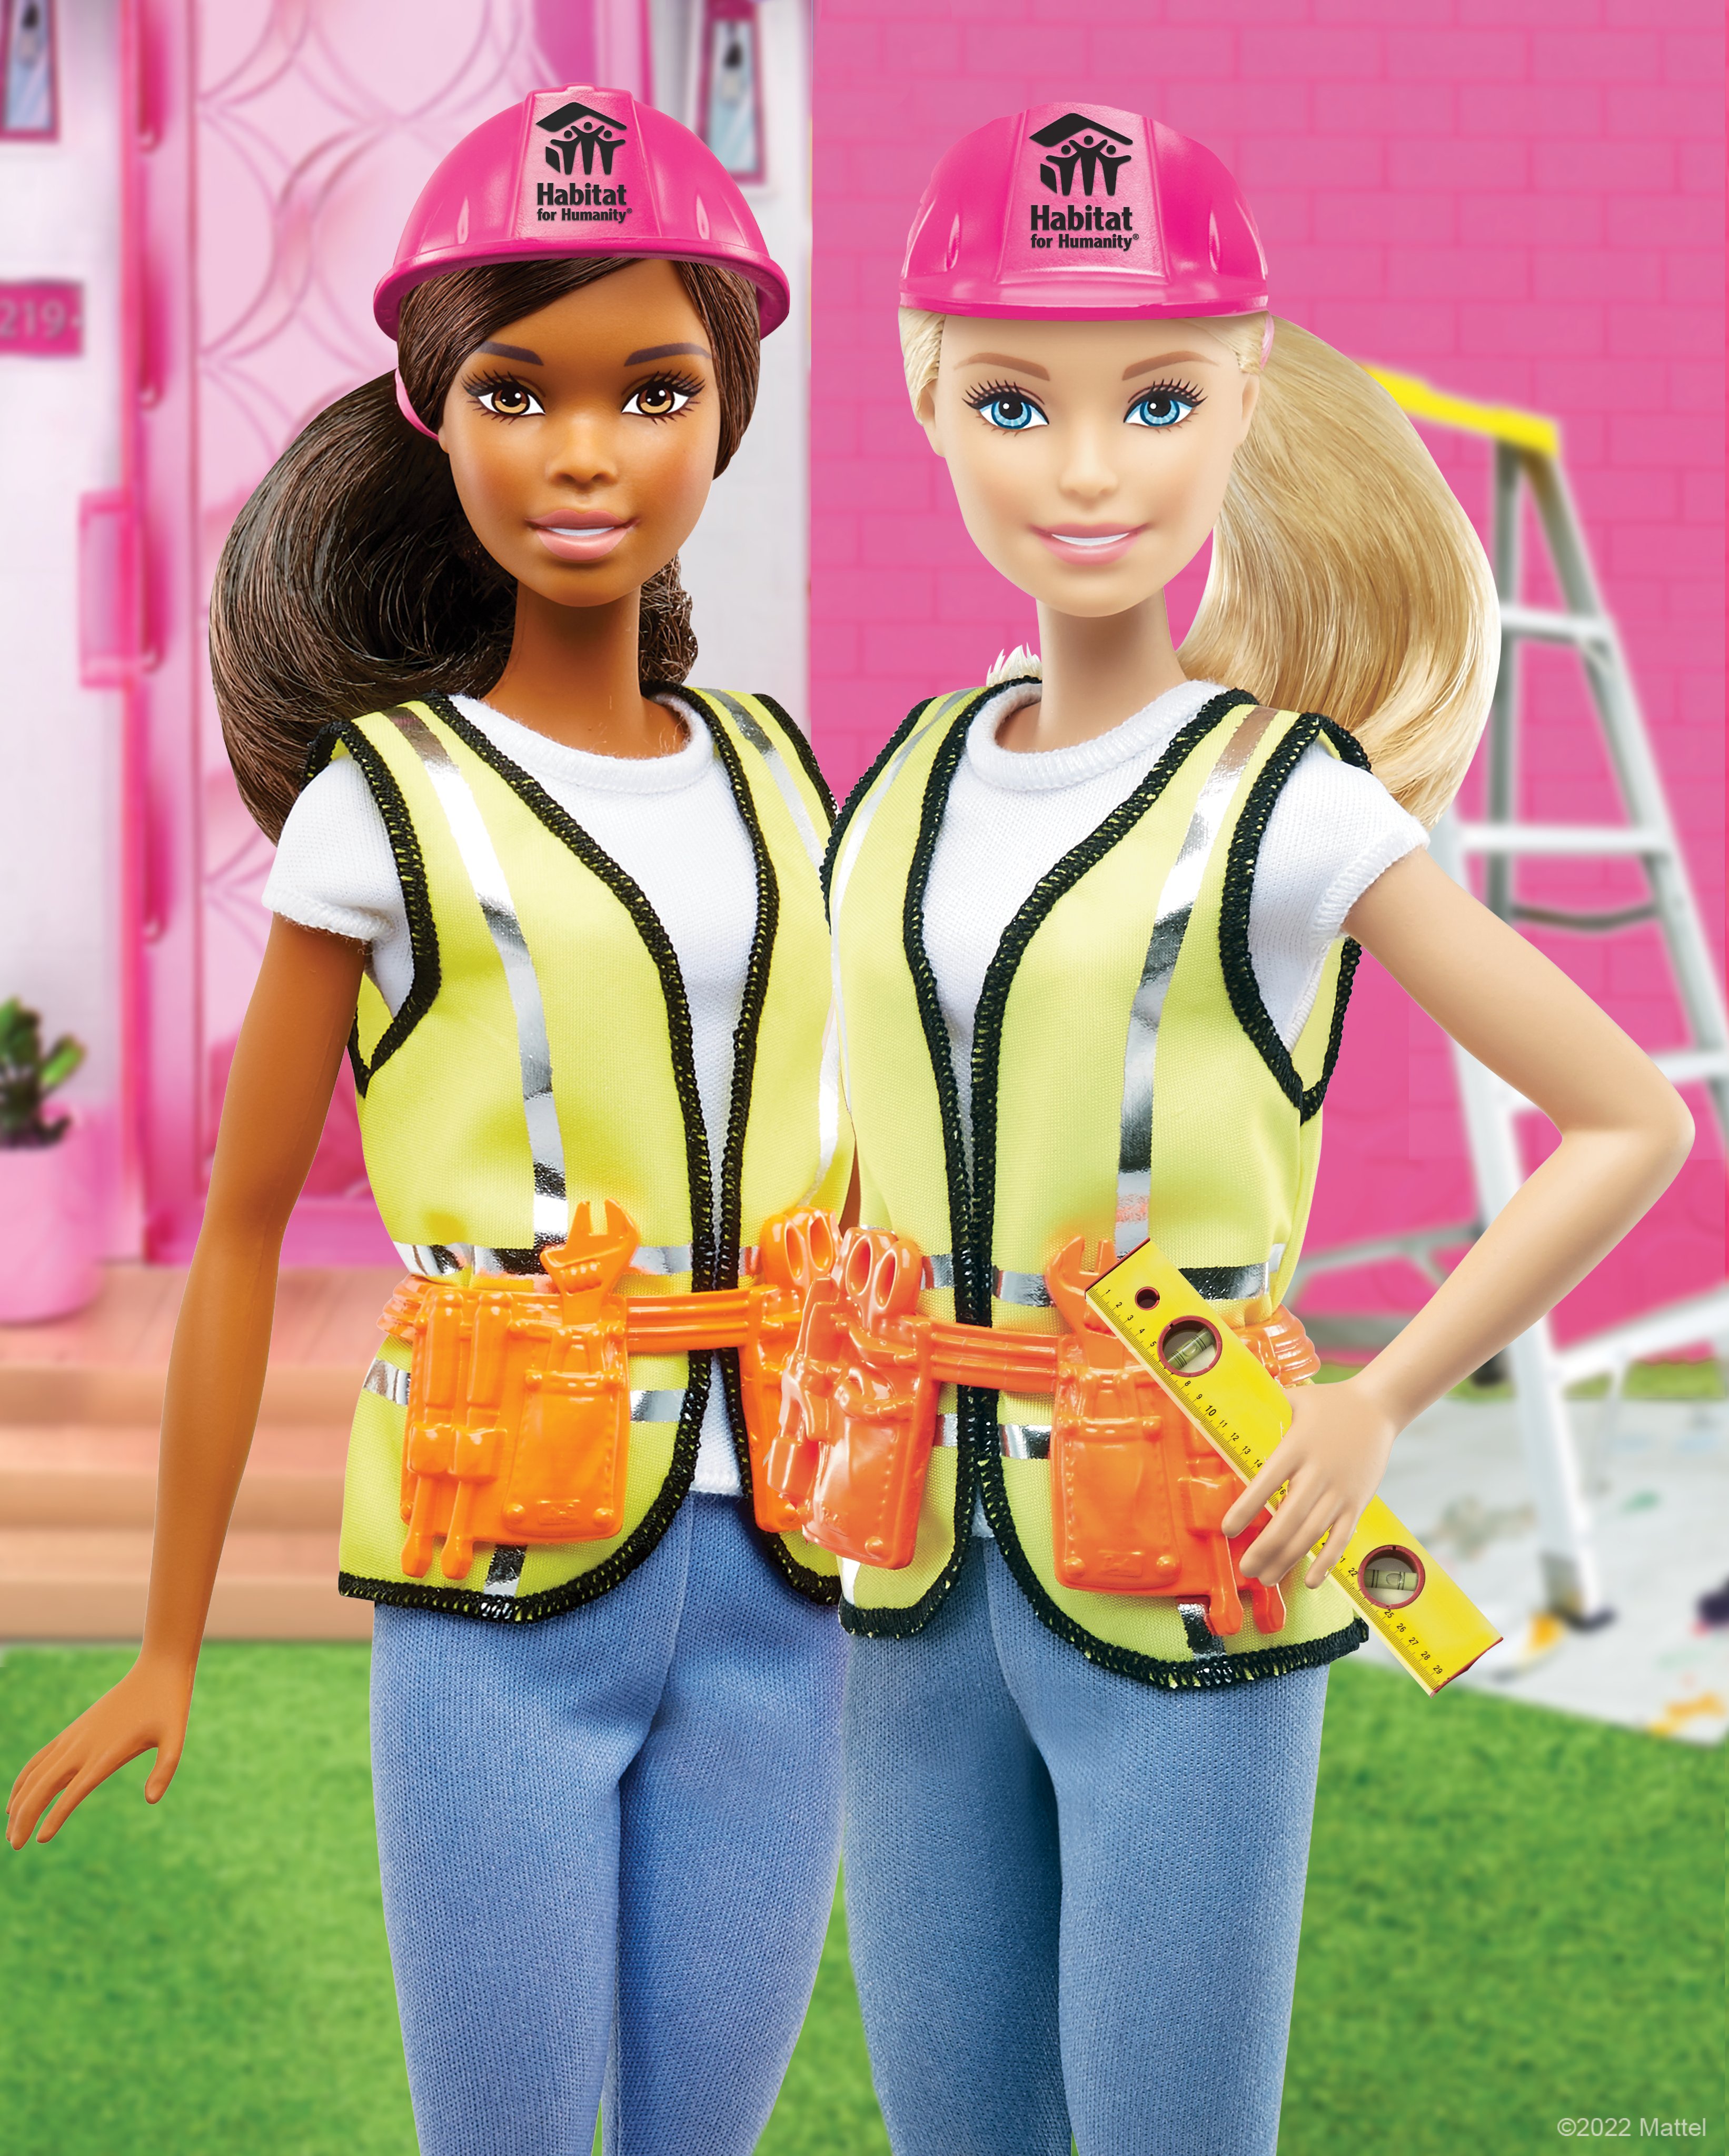 Barbie on Twitter: "Today, #Barbie and @Habitat_org begin construction on a  worldwide initiative to ring in the landmark 60th anniversary of the  #BarbieDreamHouse.👷🏾‍♀️👷🏼‍♀️ In 2022, we look forward to creating more  opportunities